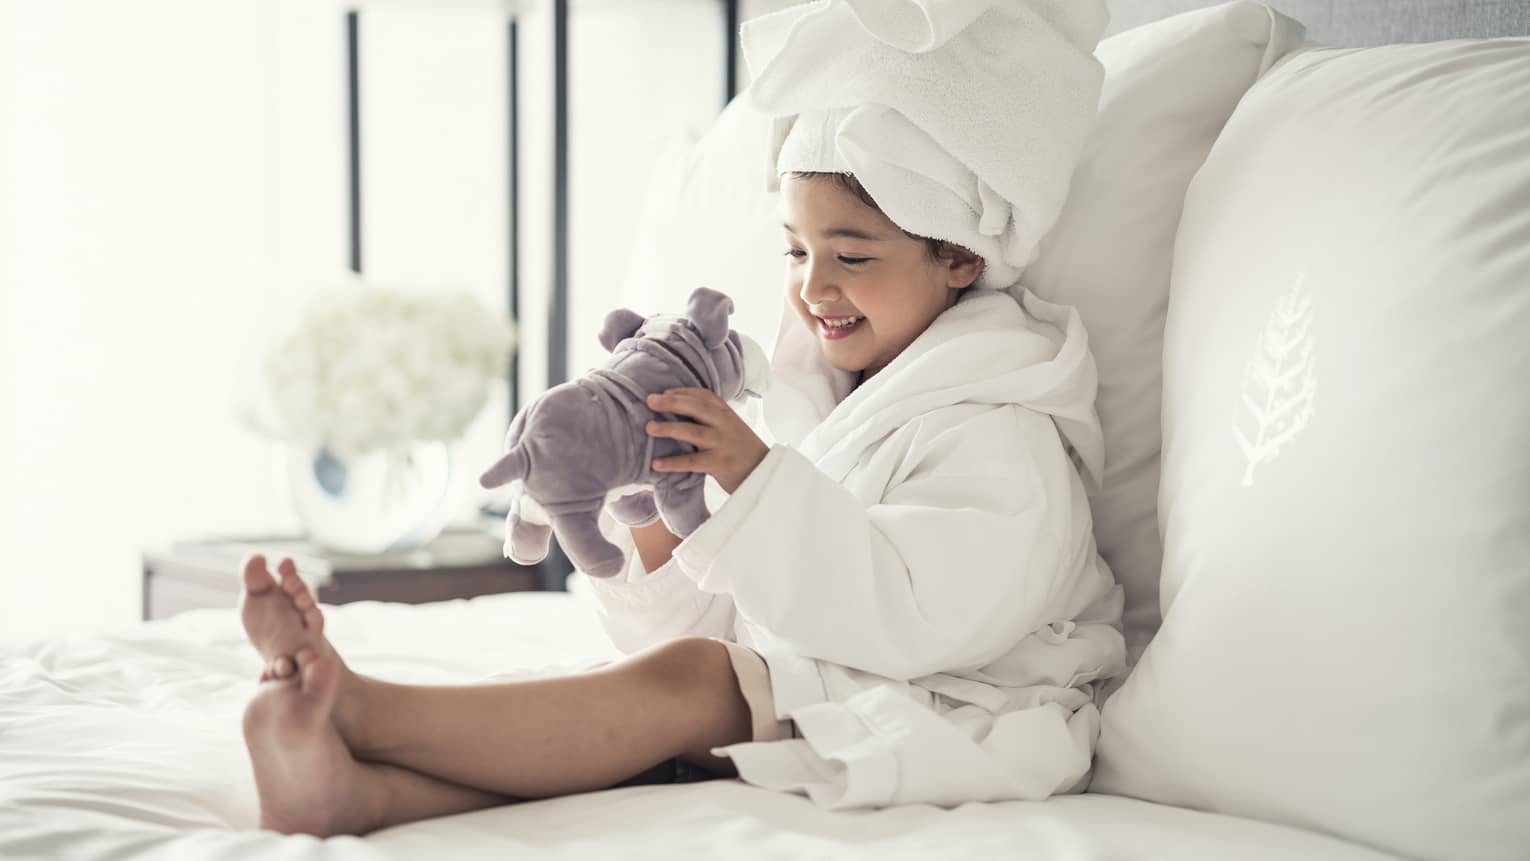 Young girl wearing a white bathrobe with towel wrap plays with plush dog toy on bed